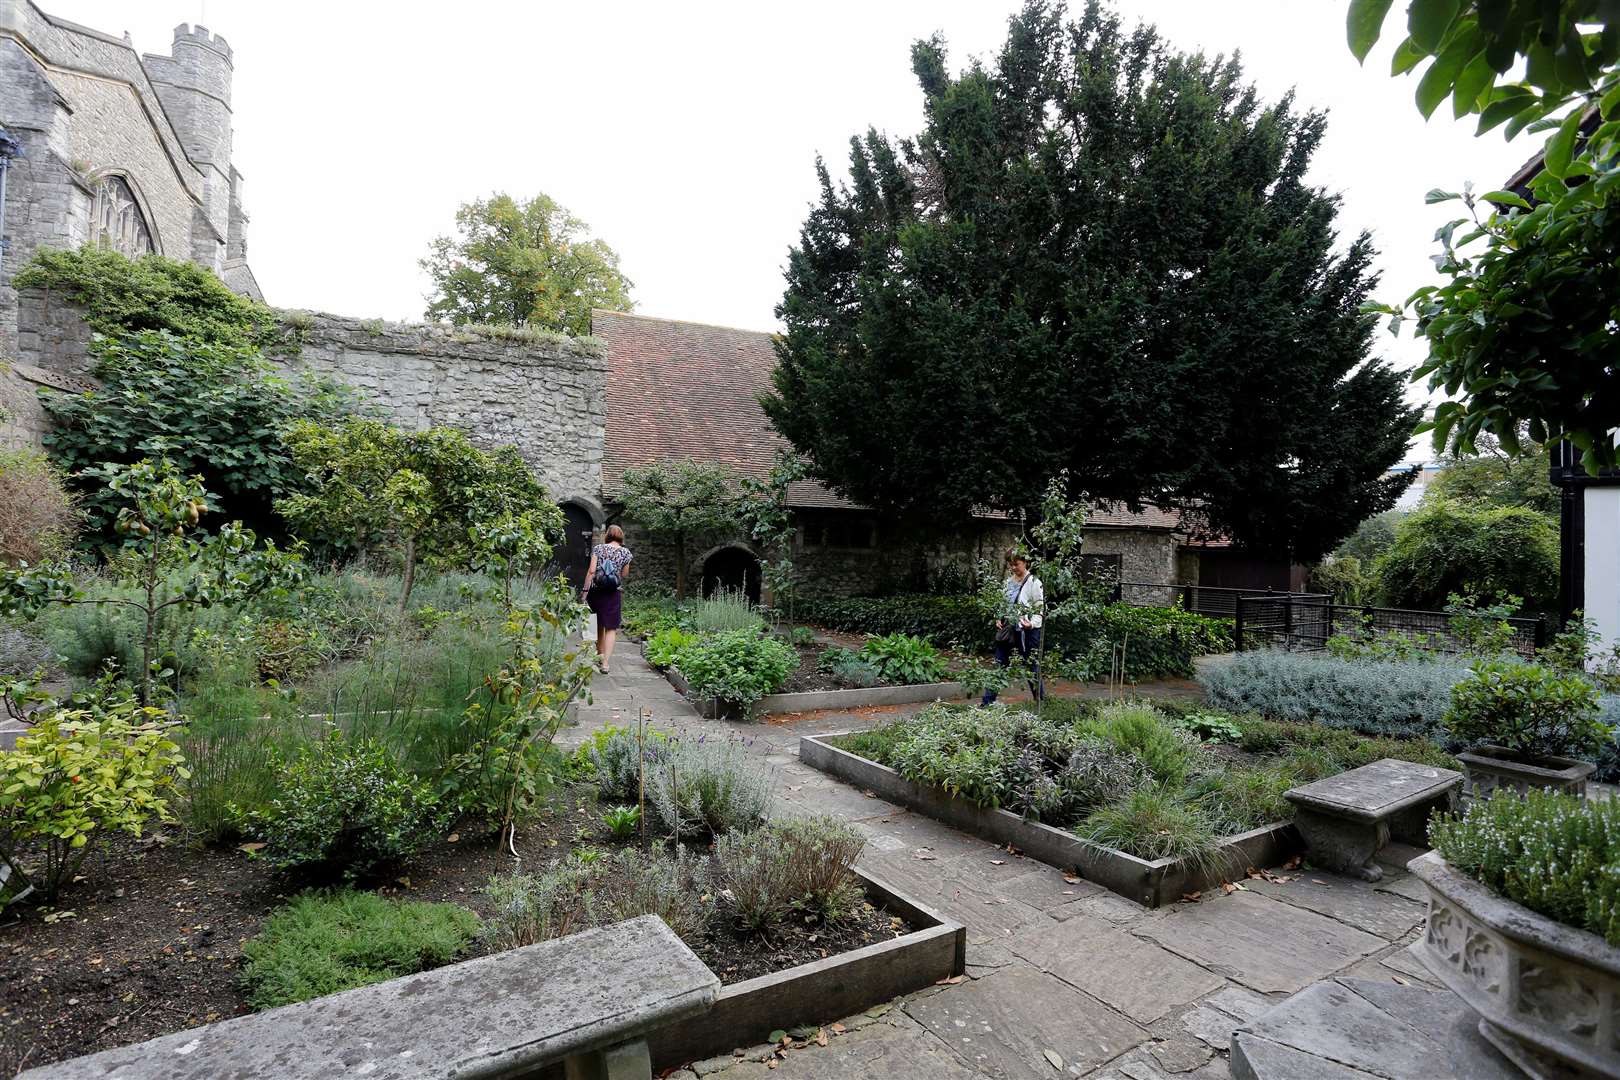 The Herb Garden at the Archbishop’s Palace in Mill Street